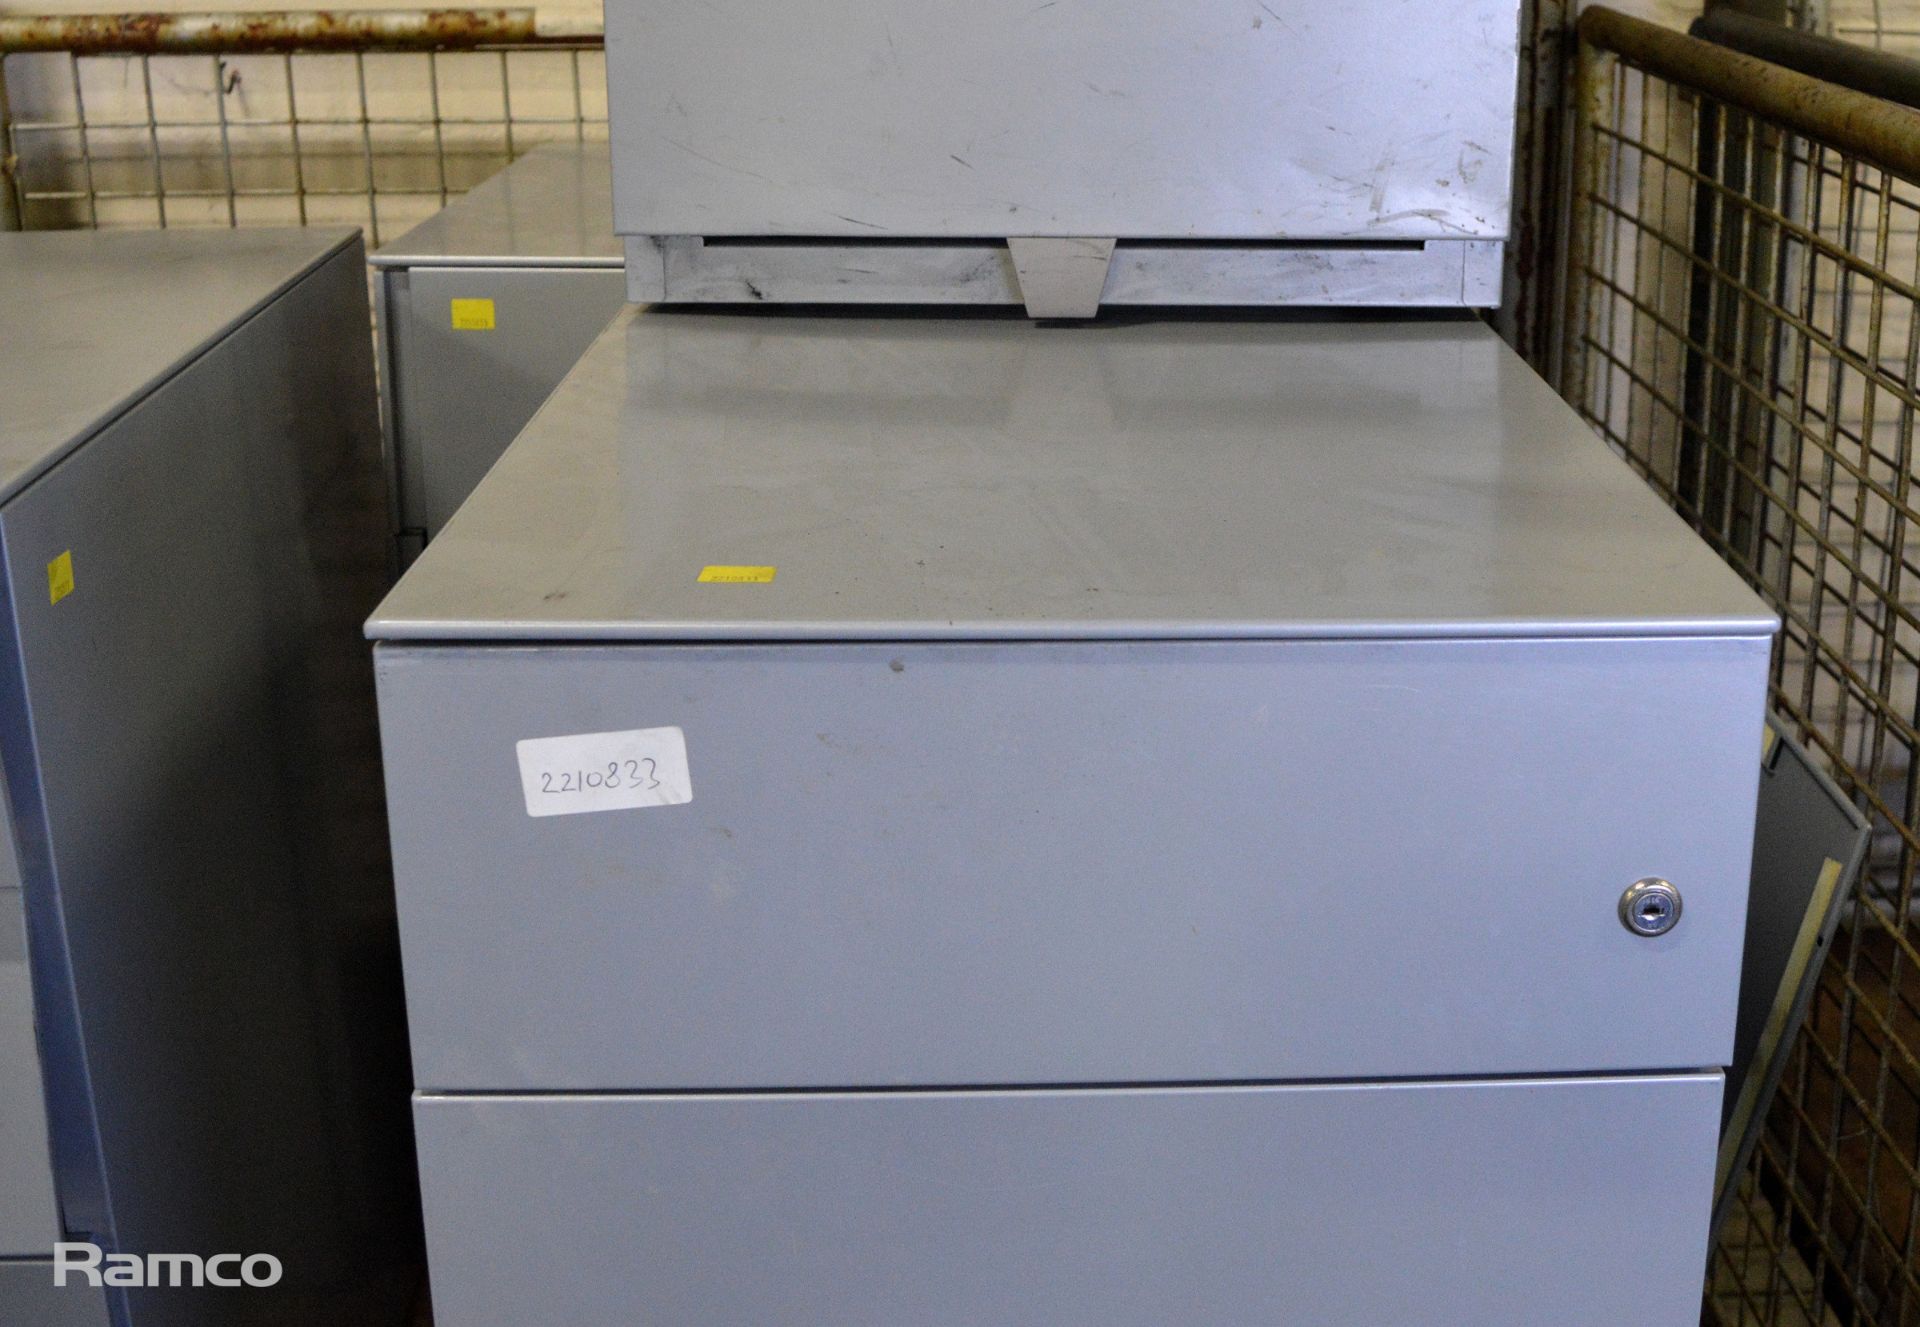 4x 3 Drawer Metal Desk Pedestals - L560 x W420 x H650mm (please see pictures for condition - Image 5 of 6